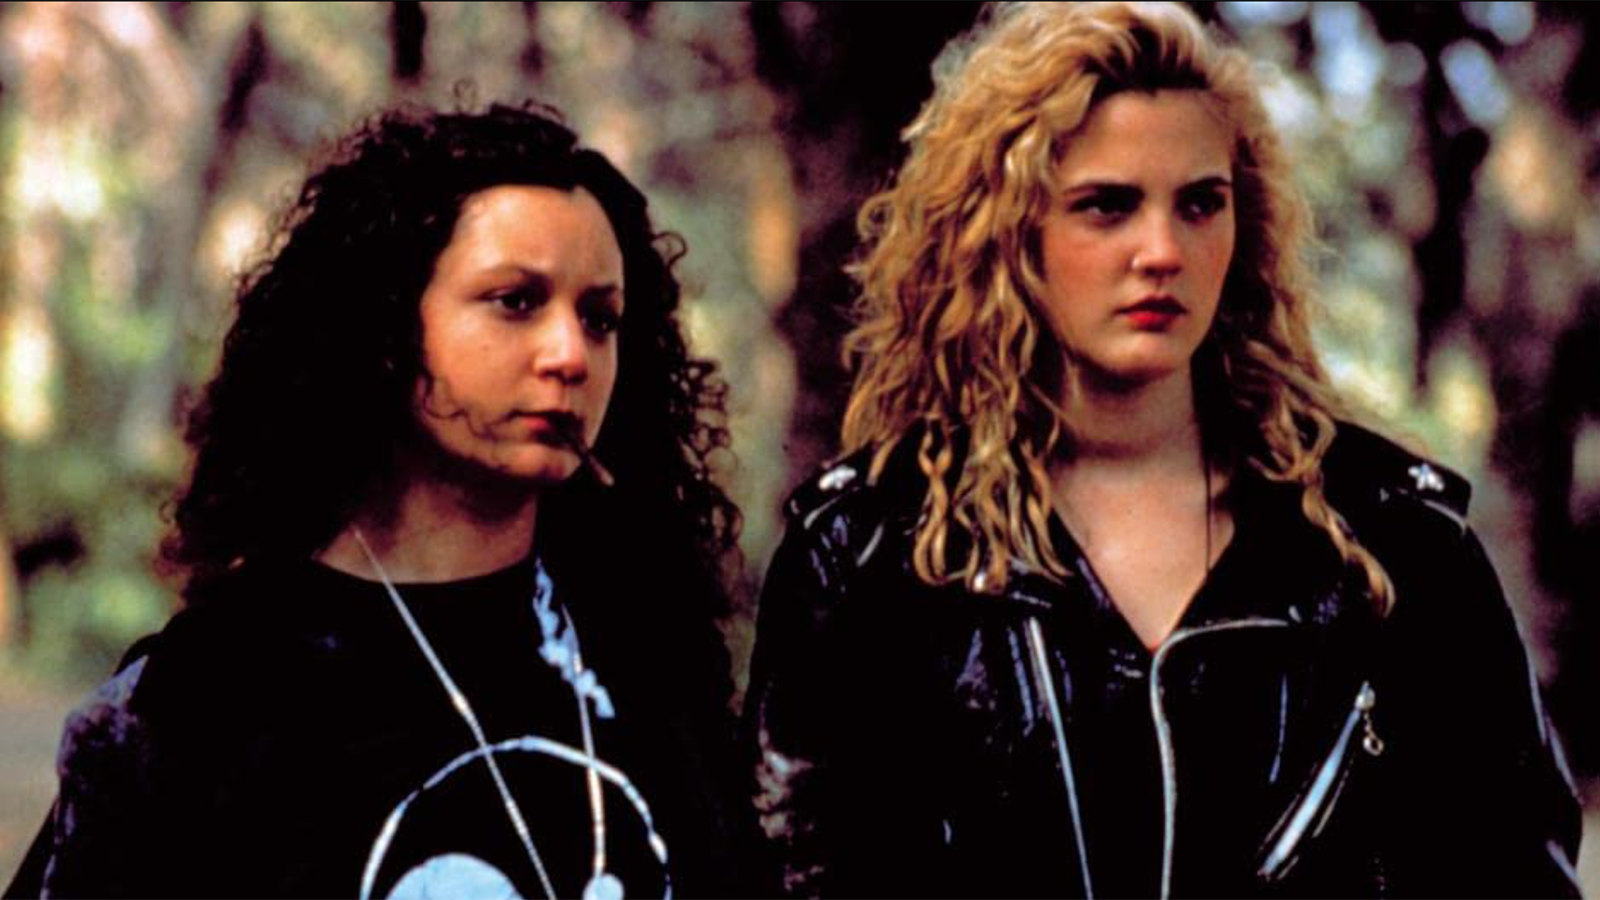 A screencap from Poison Ivy. The characters Ivy and Sylvie stand together, looking at something offscreen